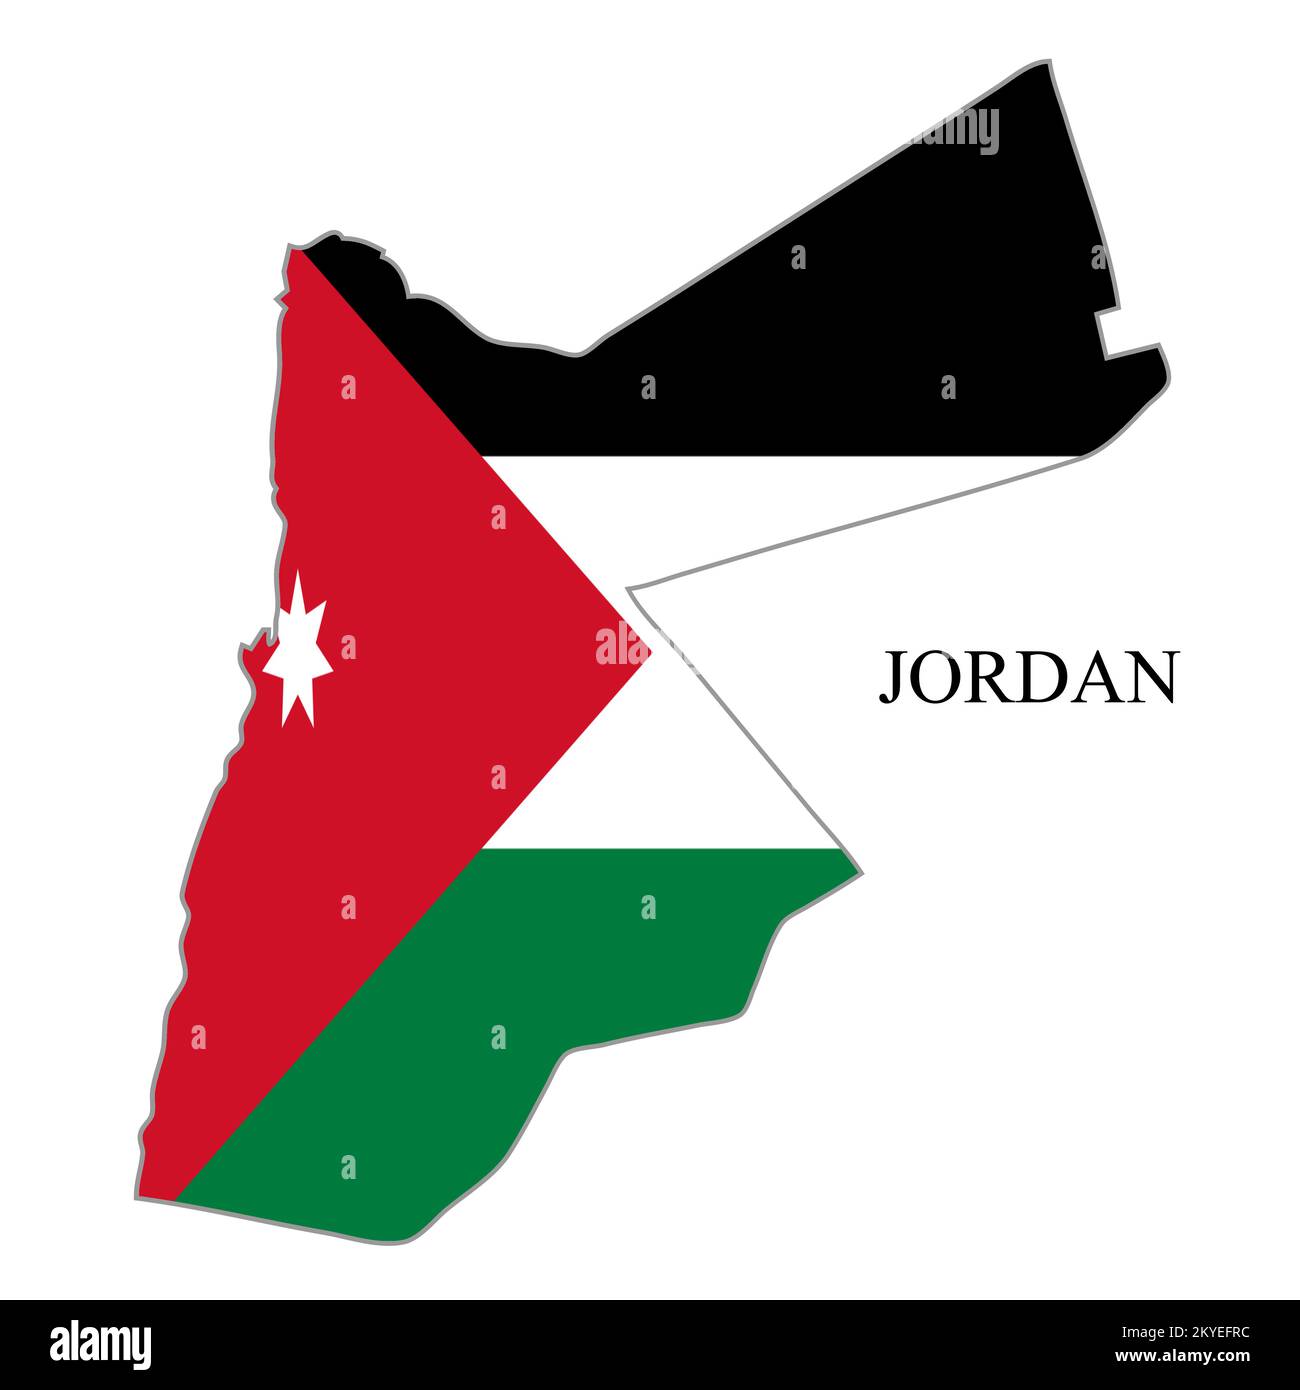 Jordan map vector illustration. Global economy. Famous country. Middle East. West Asia. Stock Vector